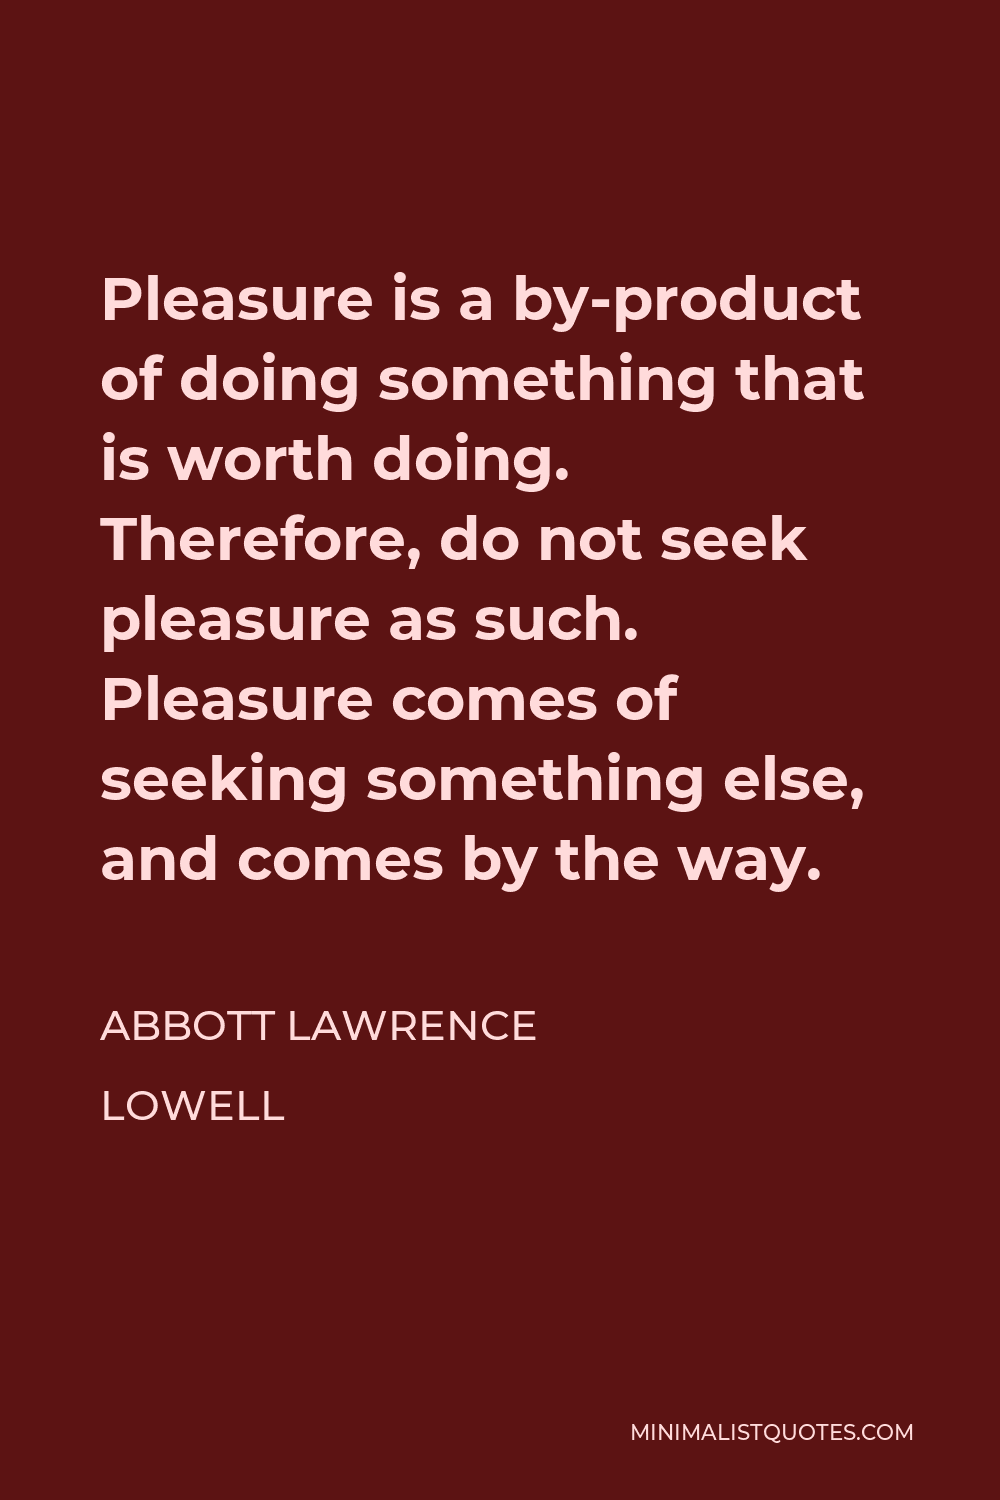 Abbott Lawrence Lowell Quote - Pleasure is a by-product of doing something that is worth doing. Therefore, do not seek pleasure as such. Pleasure comes of seeking something else, and comes by the way.